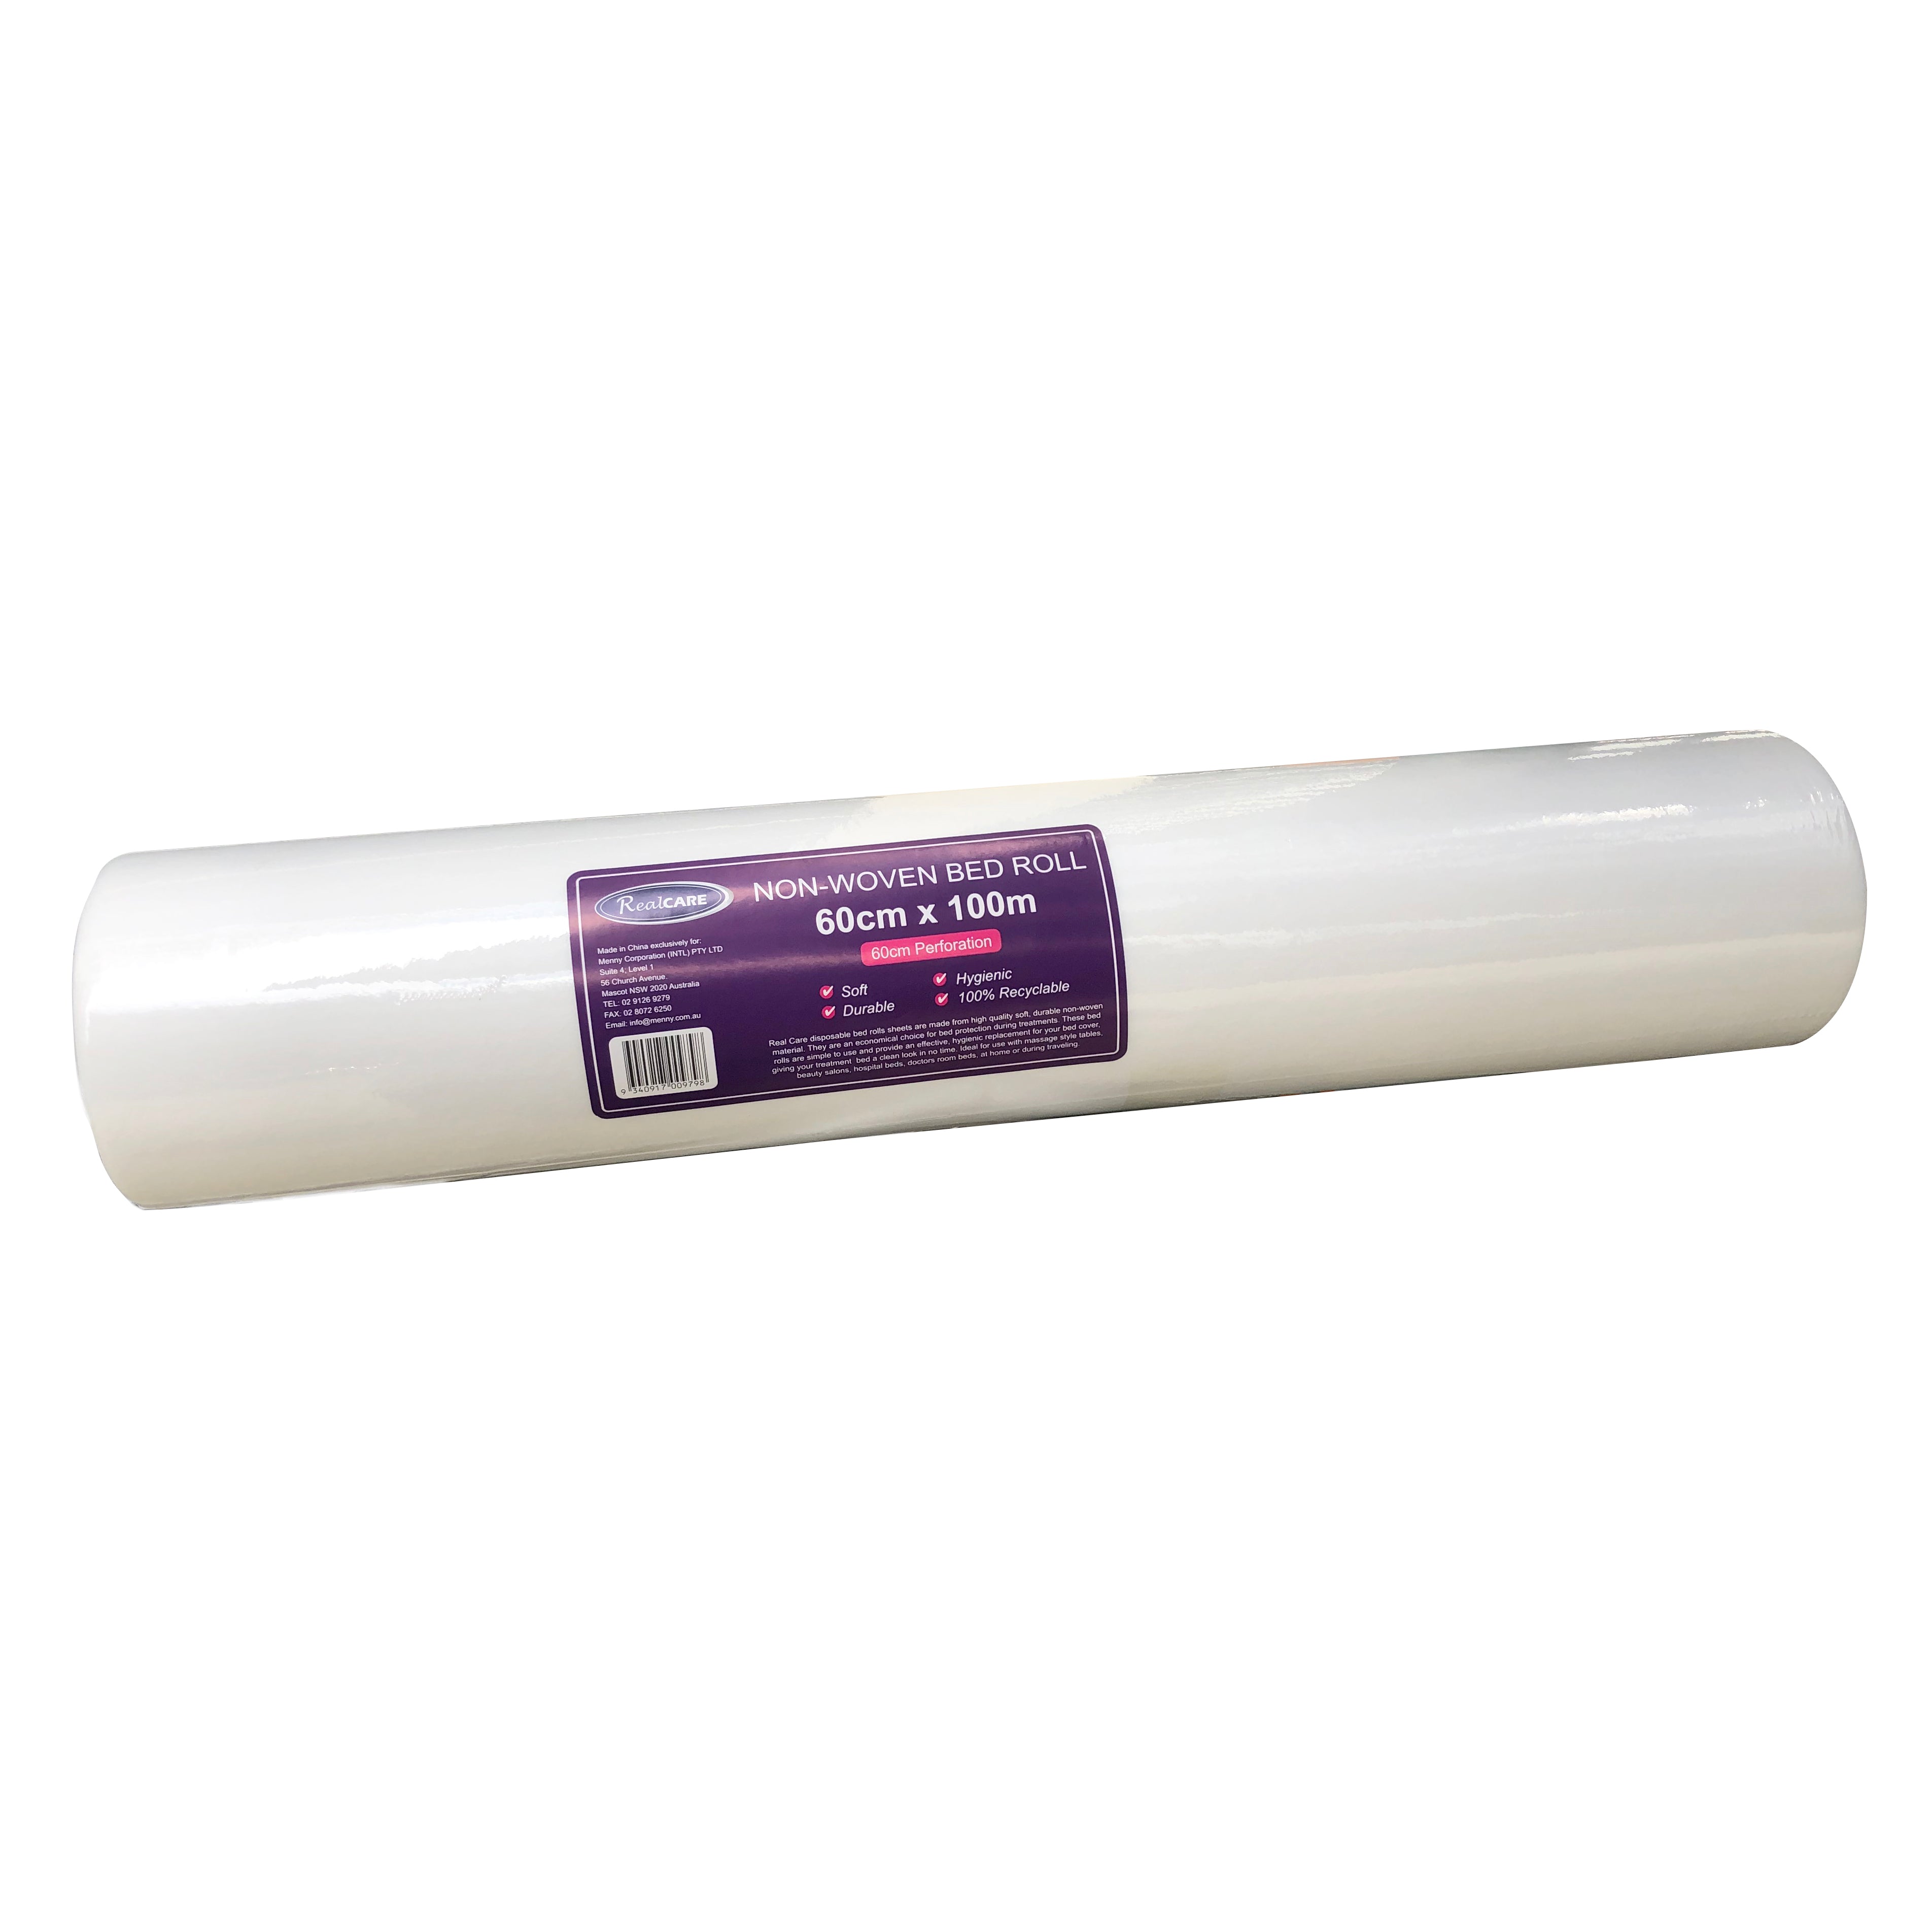 Real Care Non Woven Bed Roll Cover 60cm Wide x 100mtr long - Perforation every 60CM